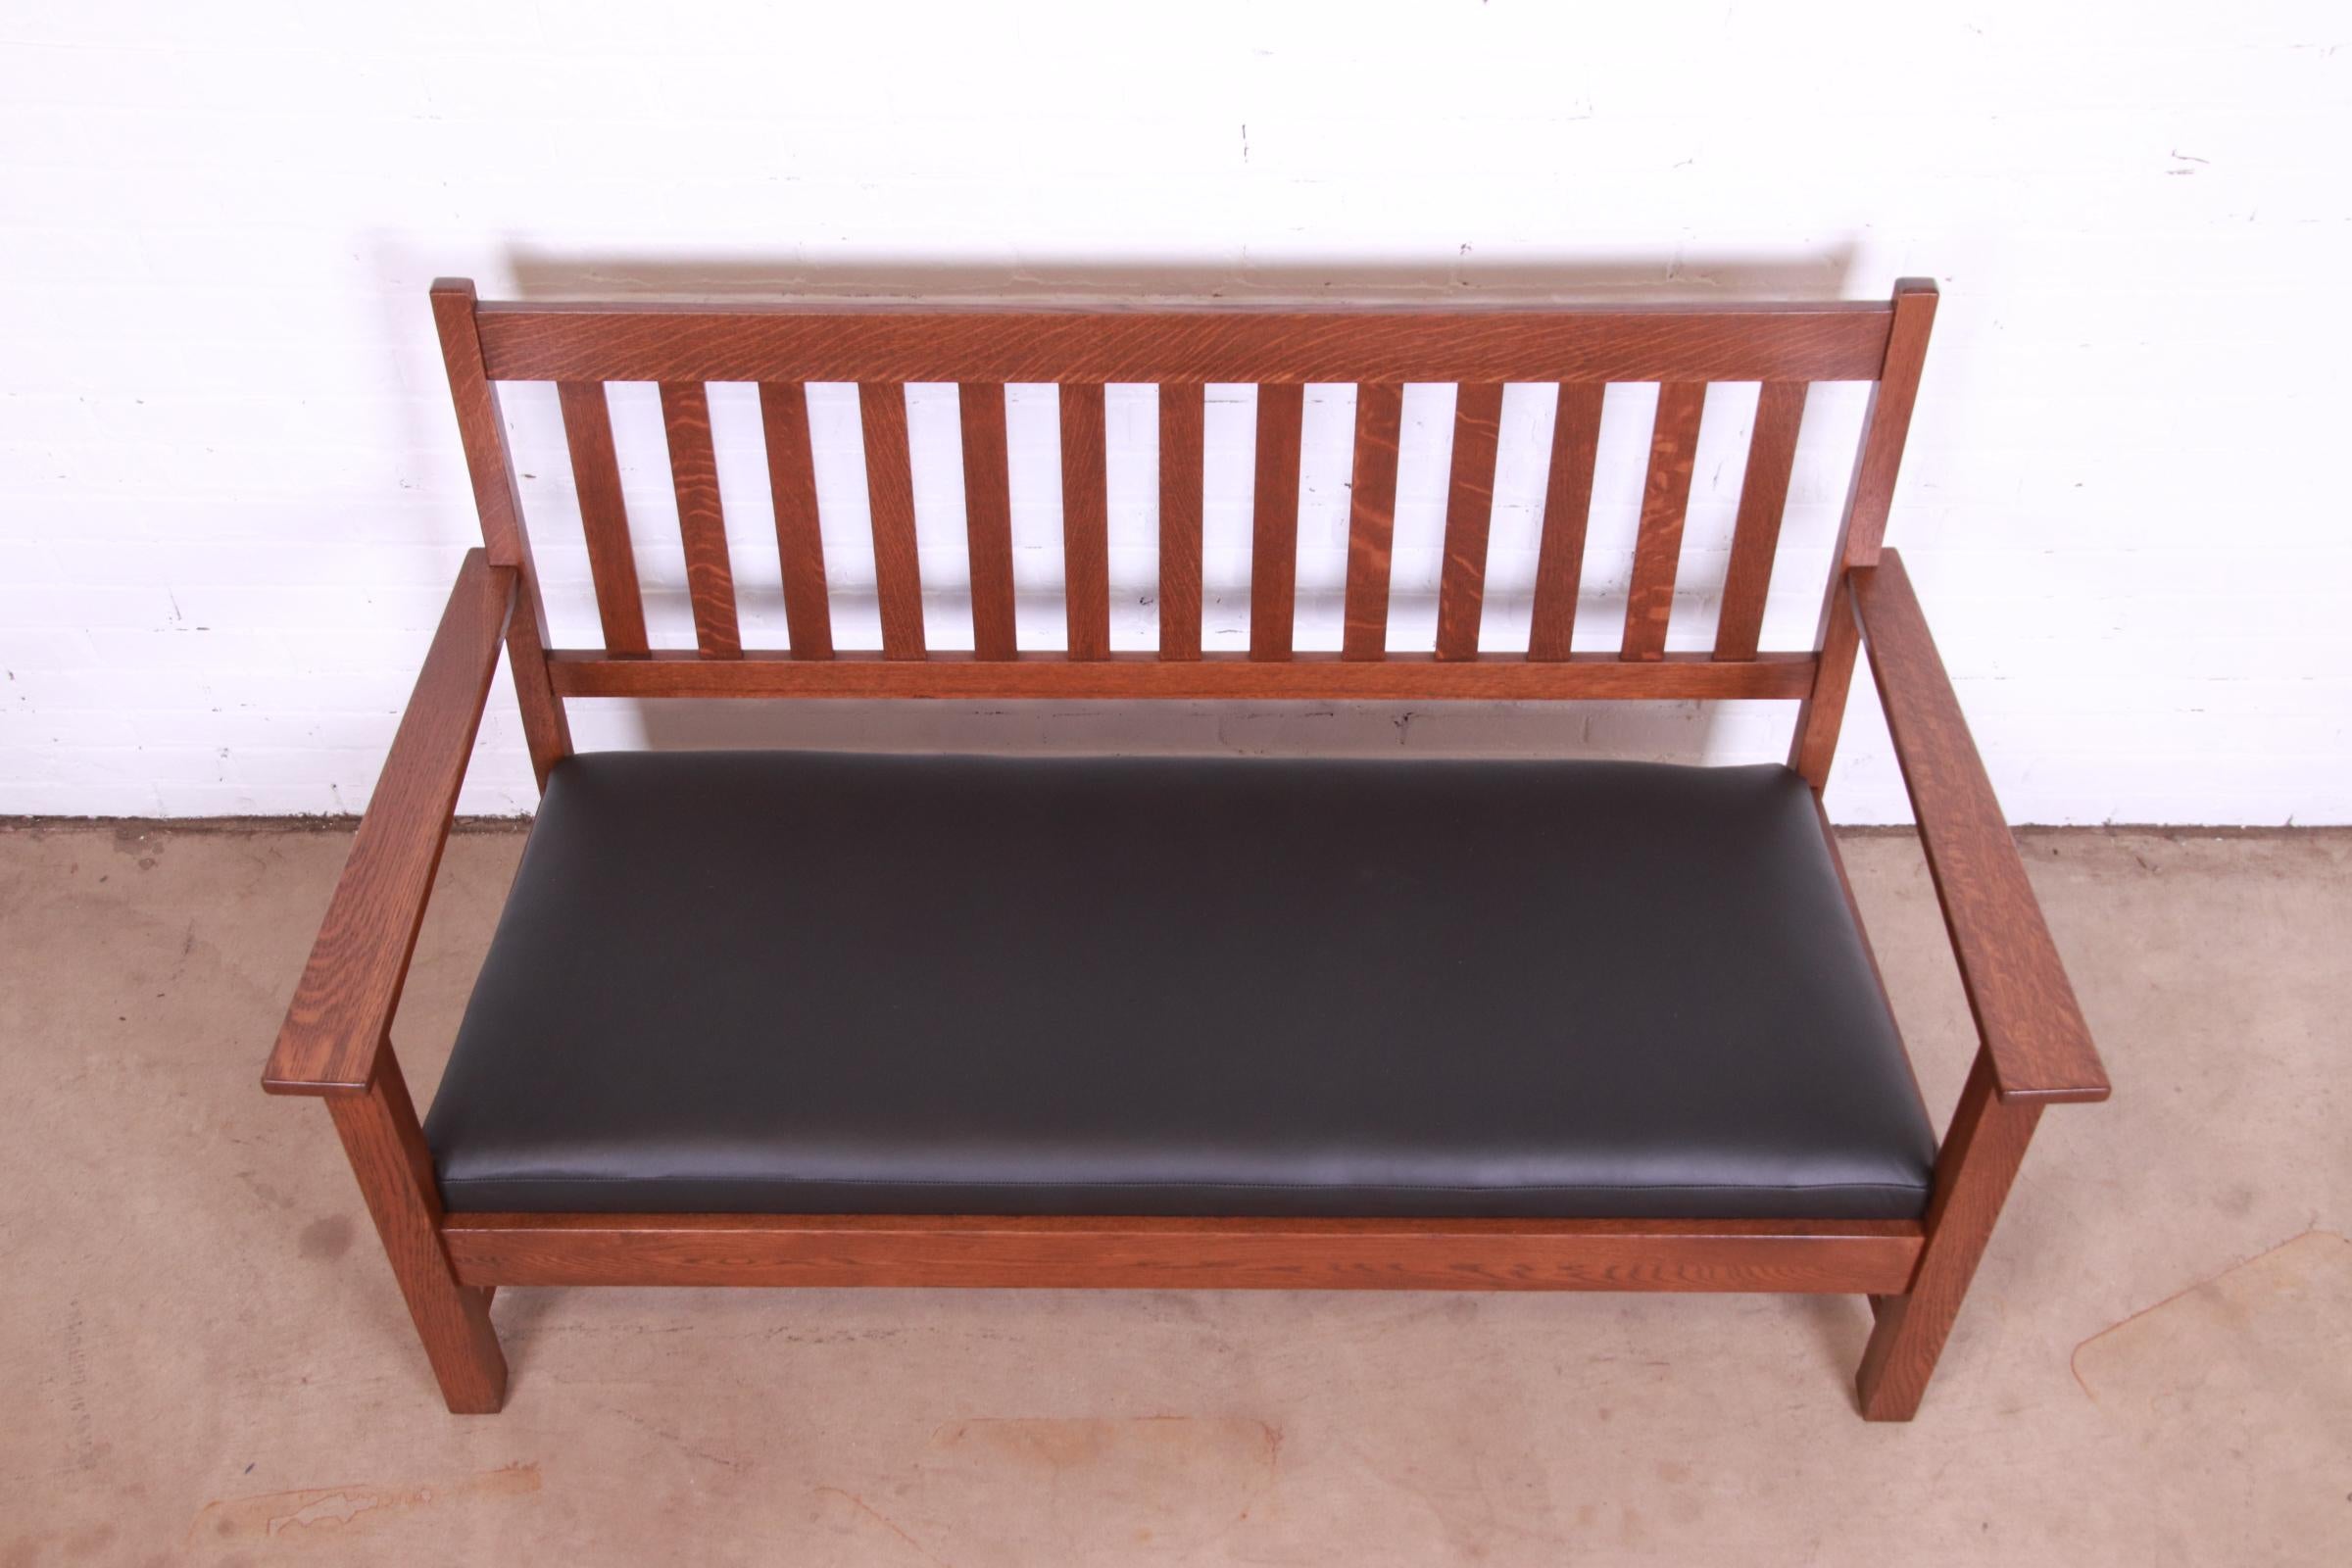 Limbert Mission Oak Arts & Crafts Open Arm Sofa or Settee, Fully Restored In Good Condition For Sale In South Bend, IN